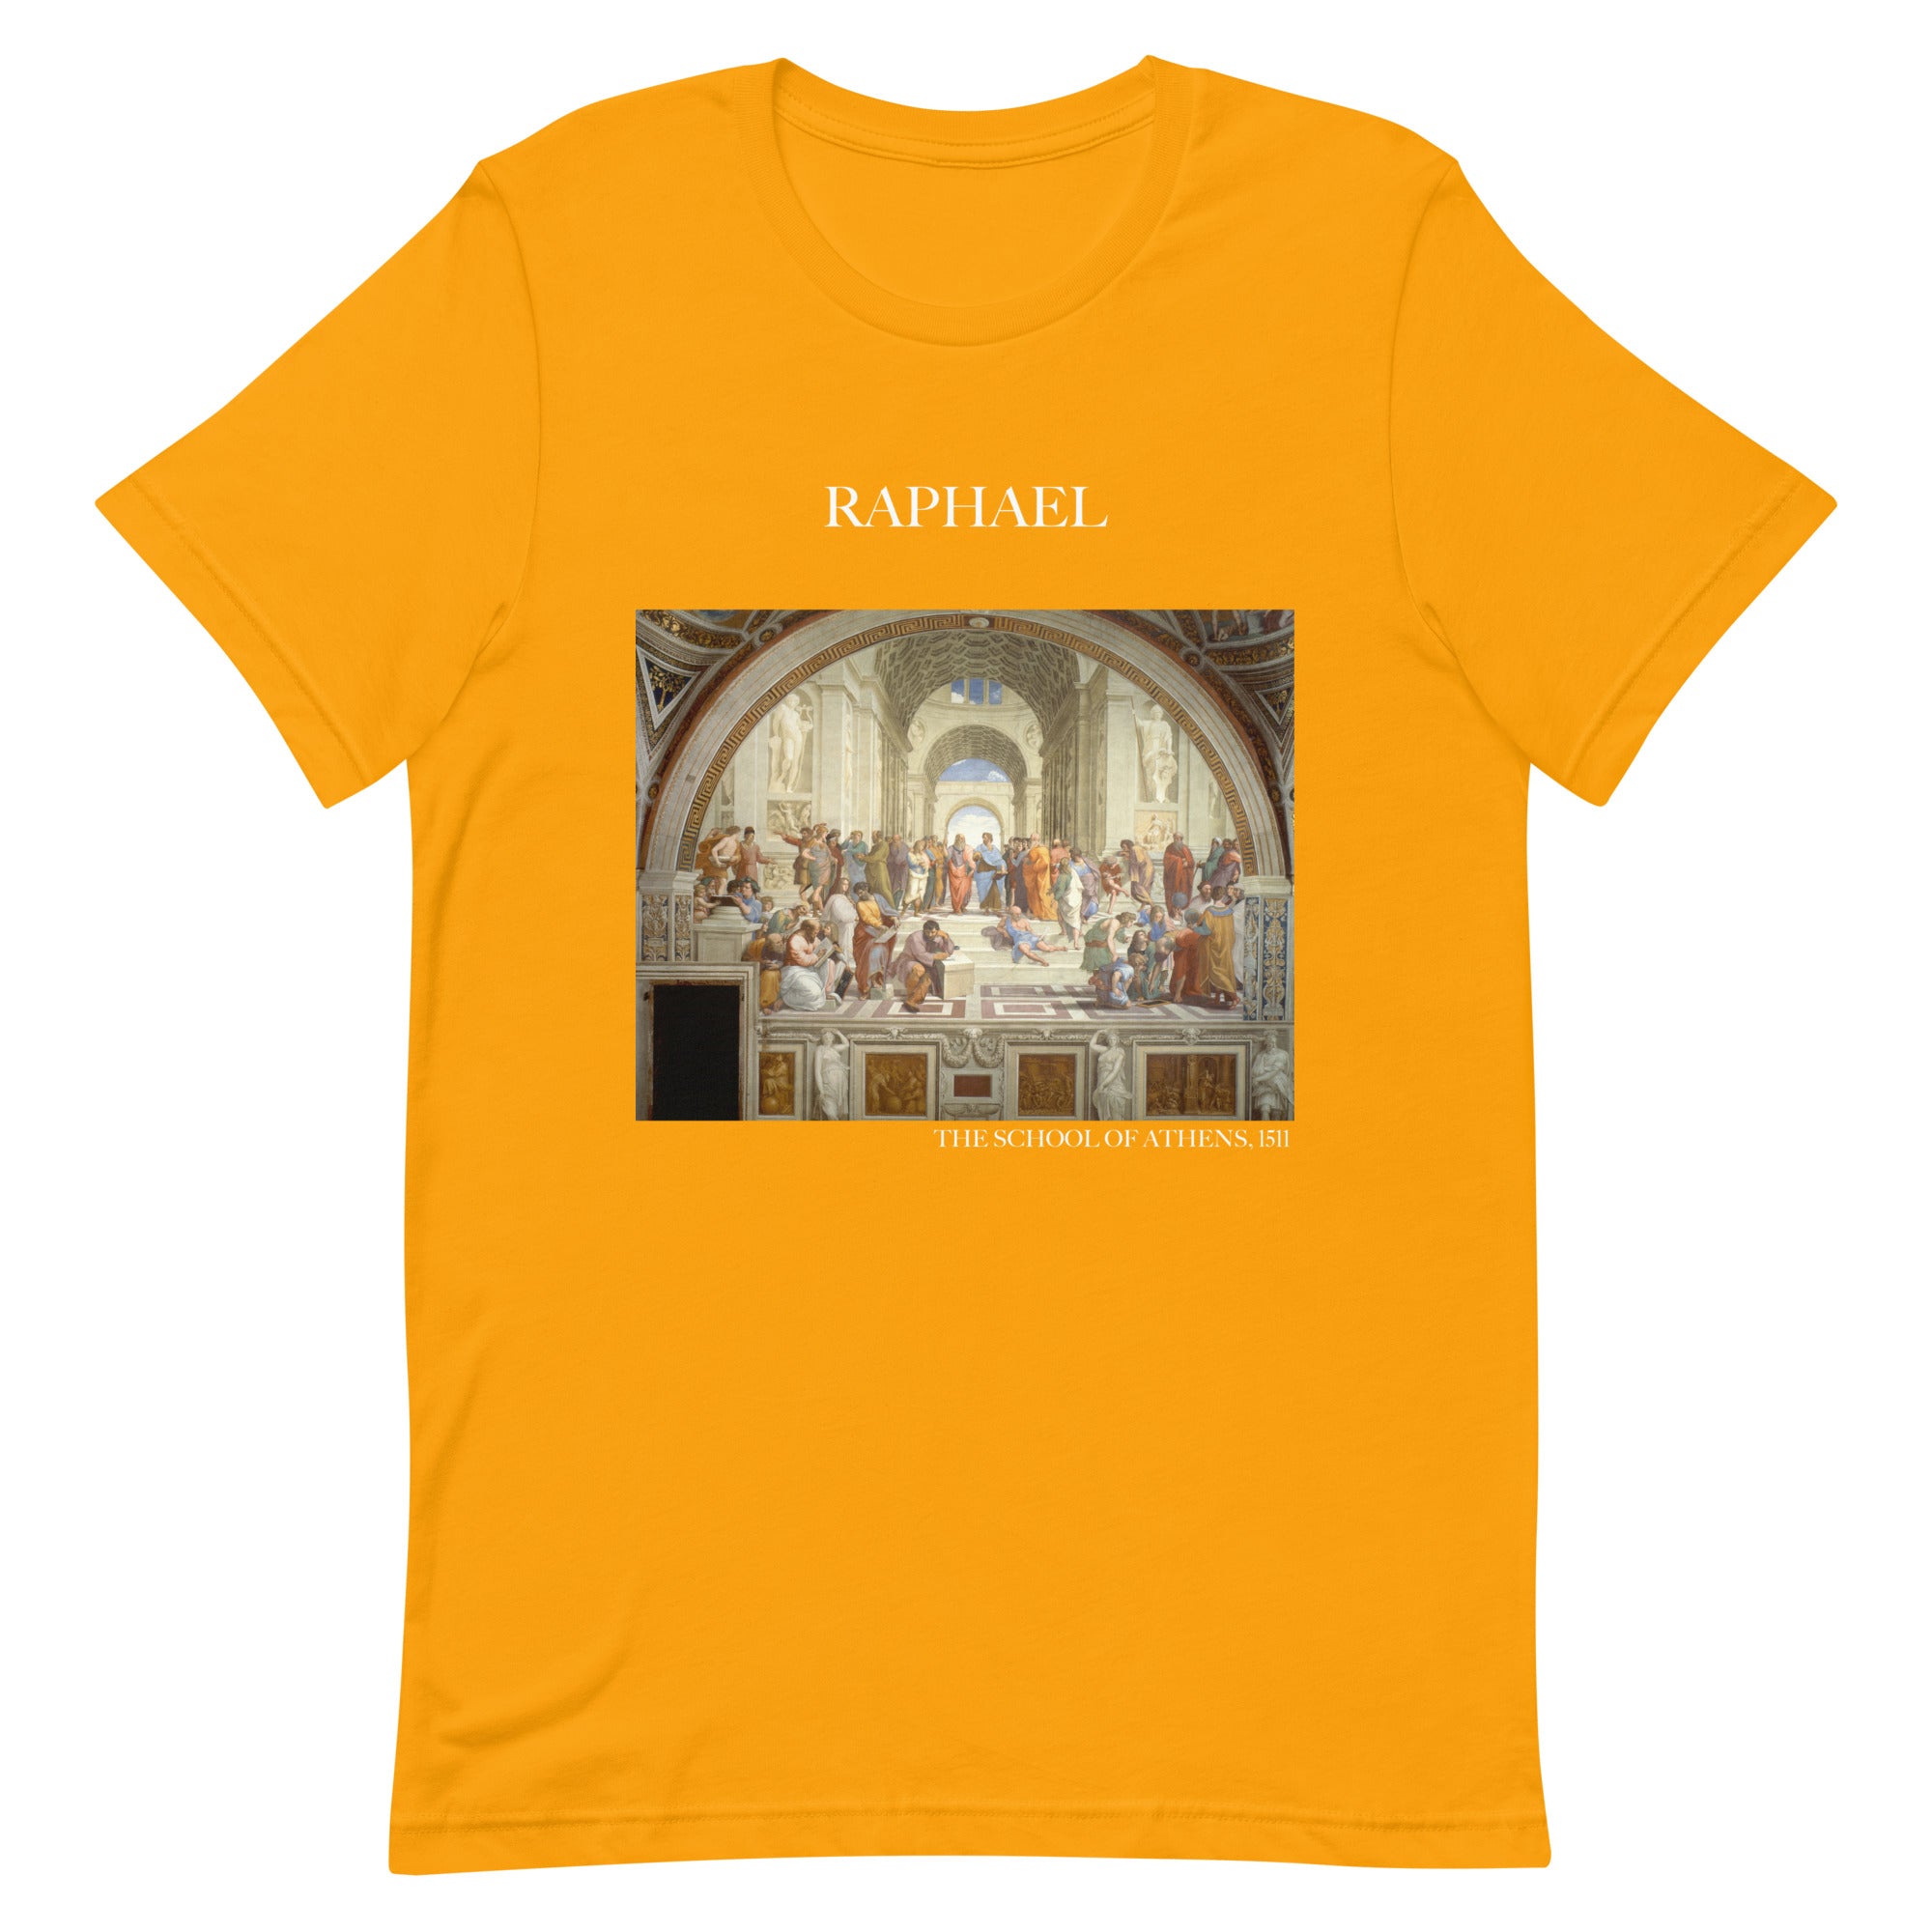 Raphael 'The School of Athens' Famous Painting T-Shirt | Unisex Classic Art Tee